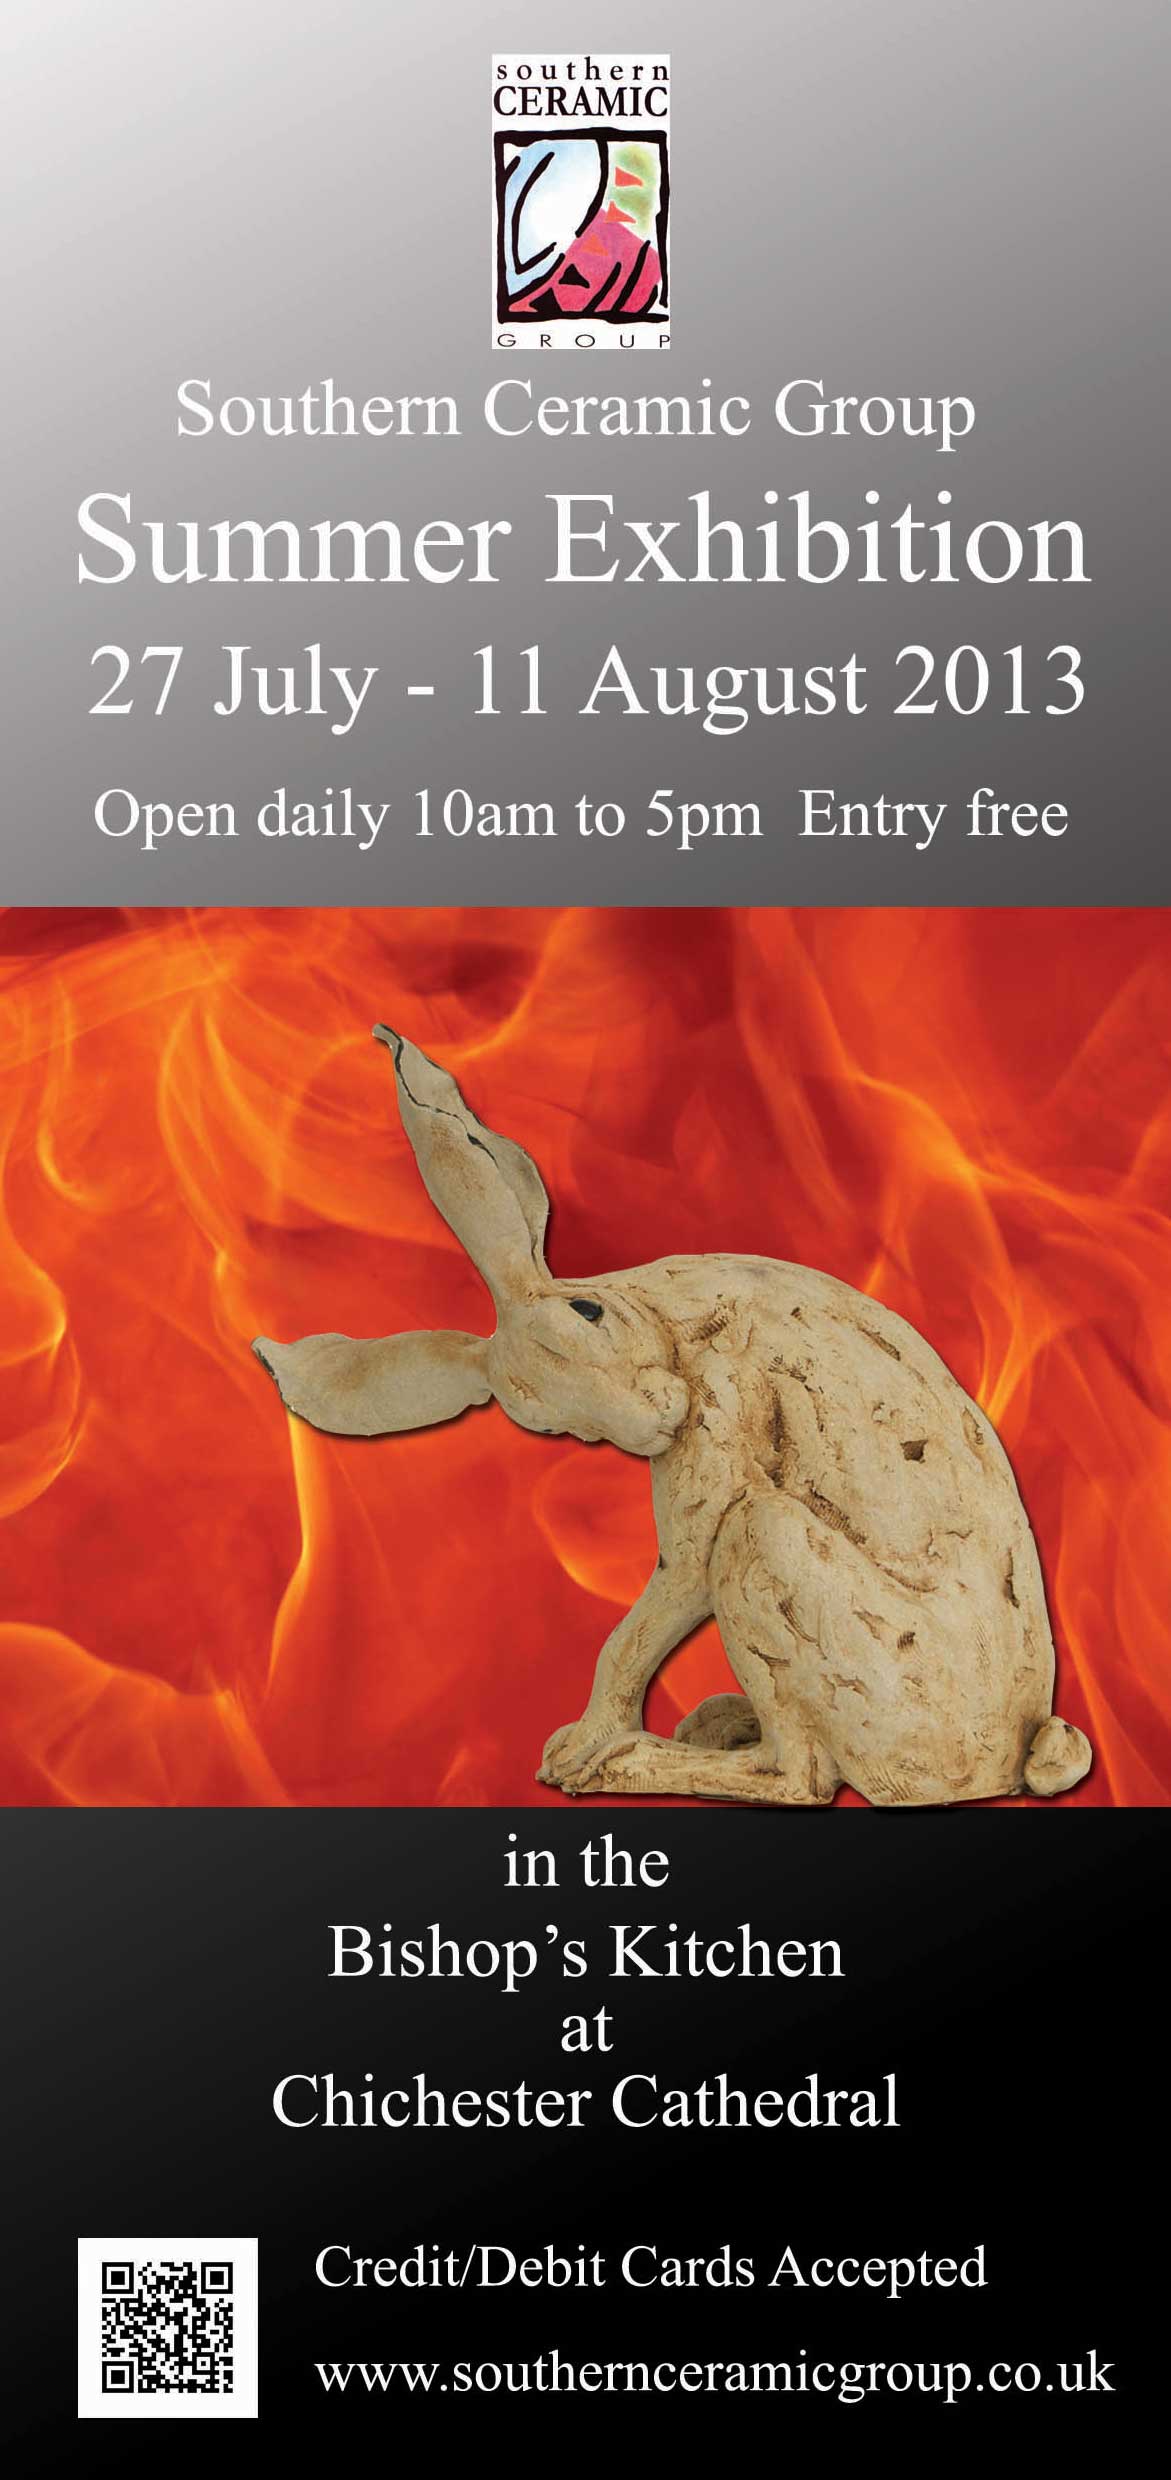 Southern Ceramic Group – Summer Exhibition, 27th July – 11th August